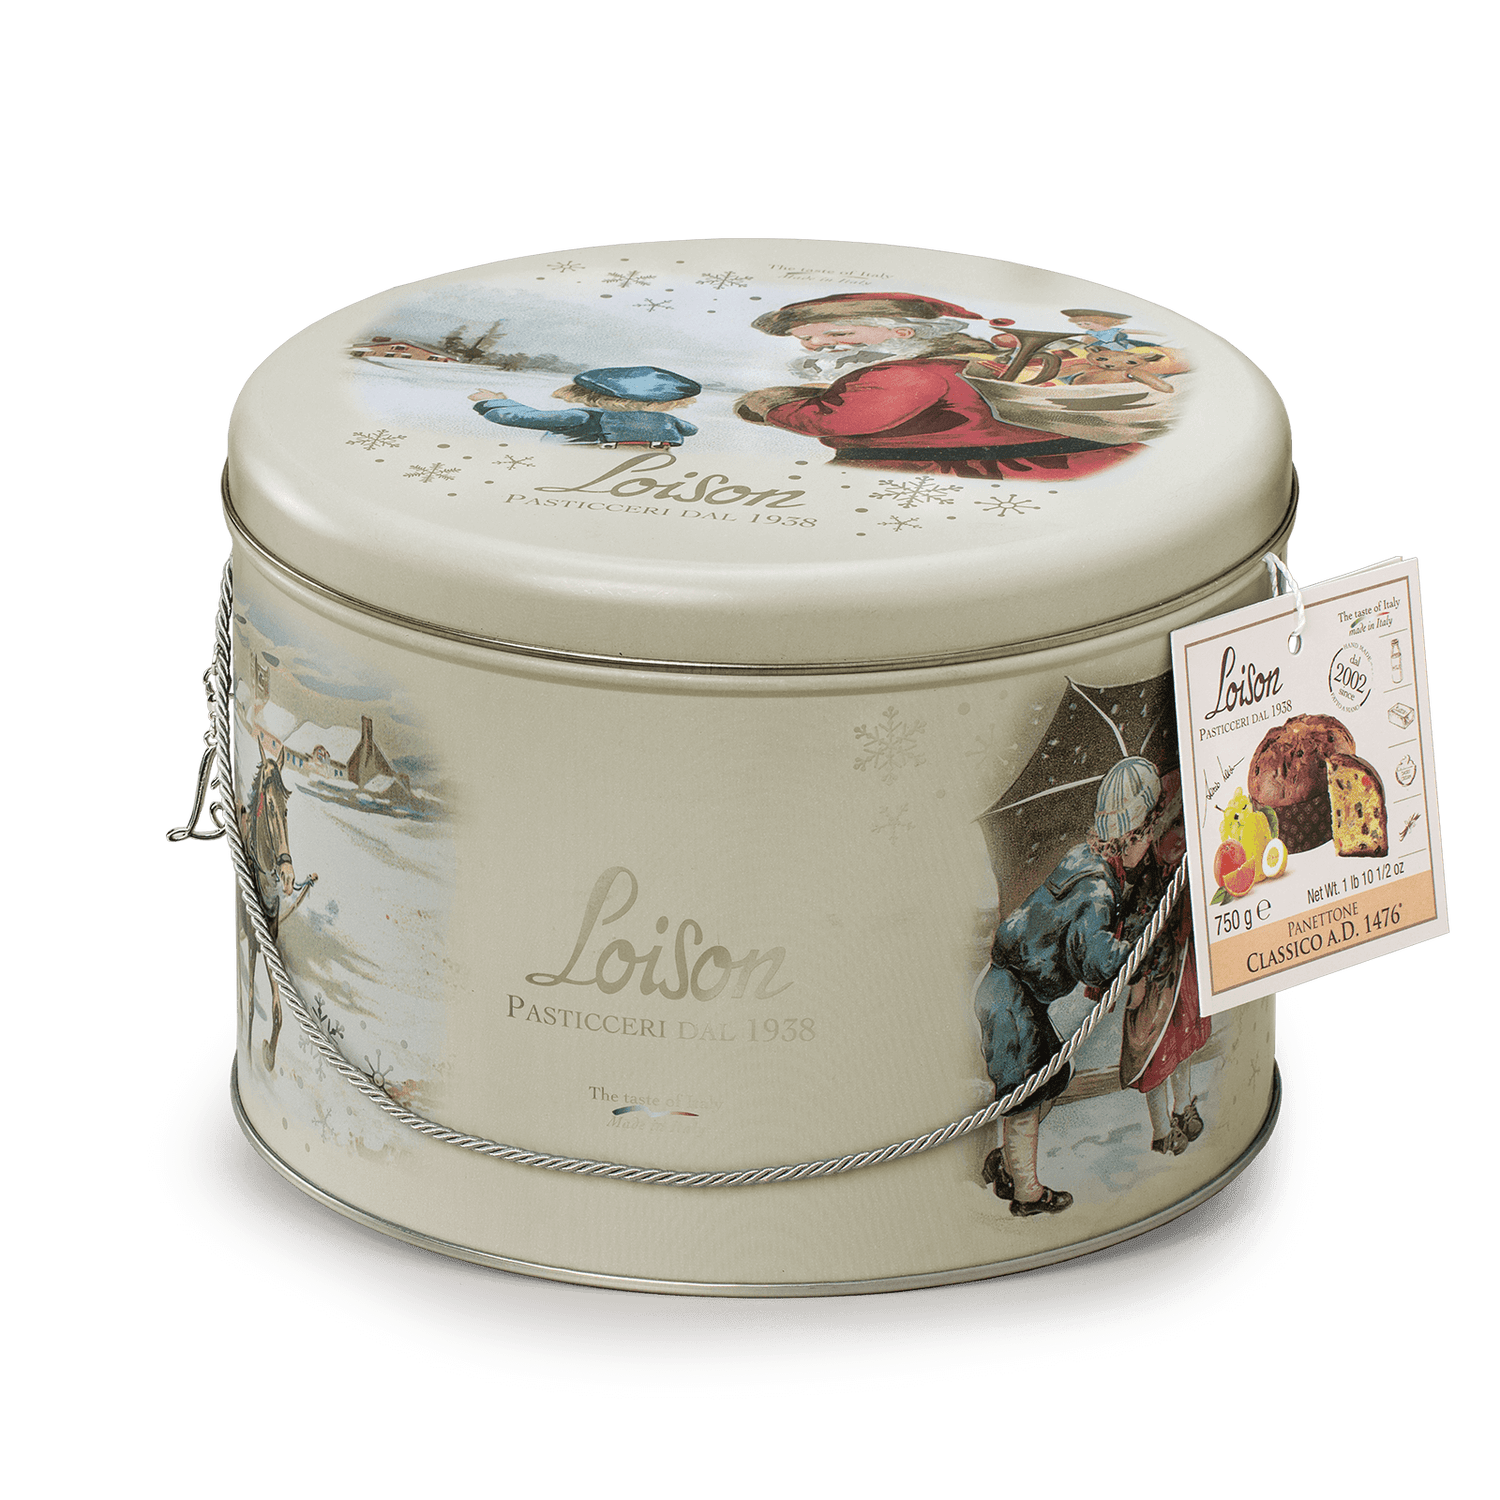 Loison Pasticceri Imported Italian Cakes and Cookies